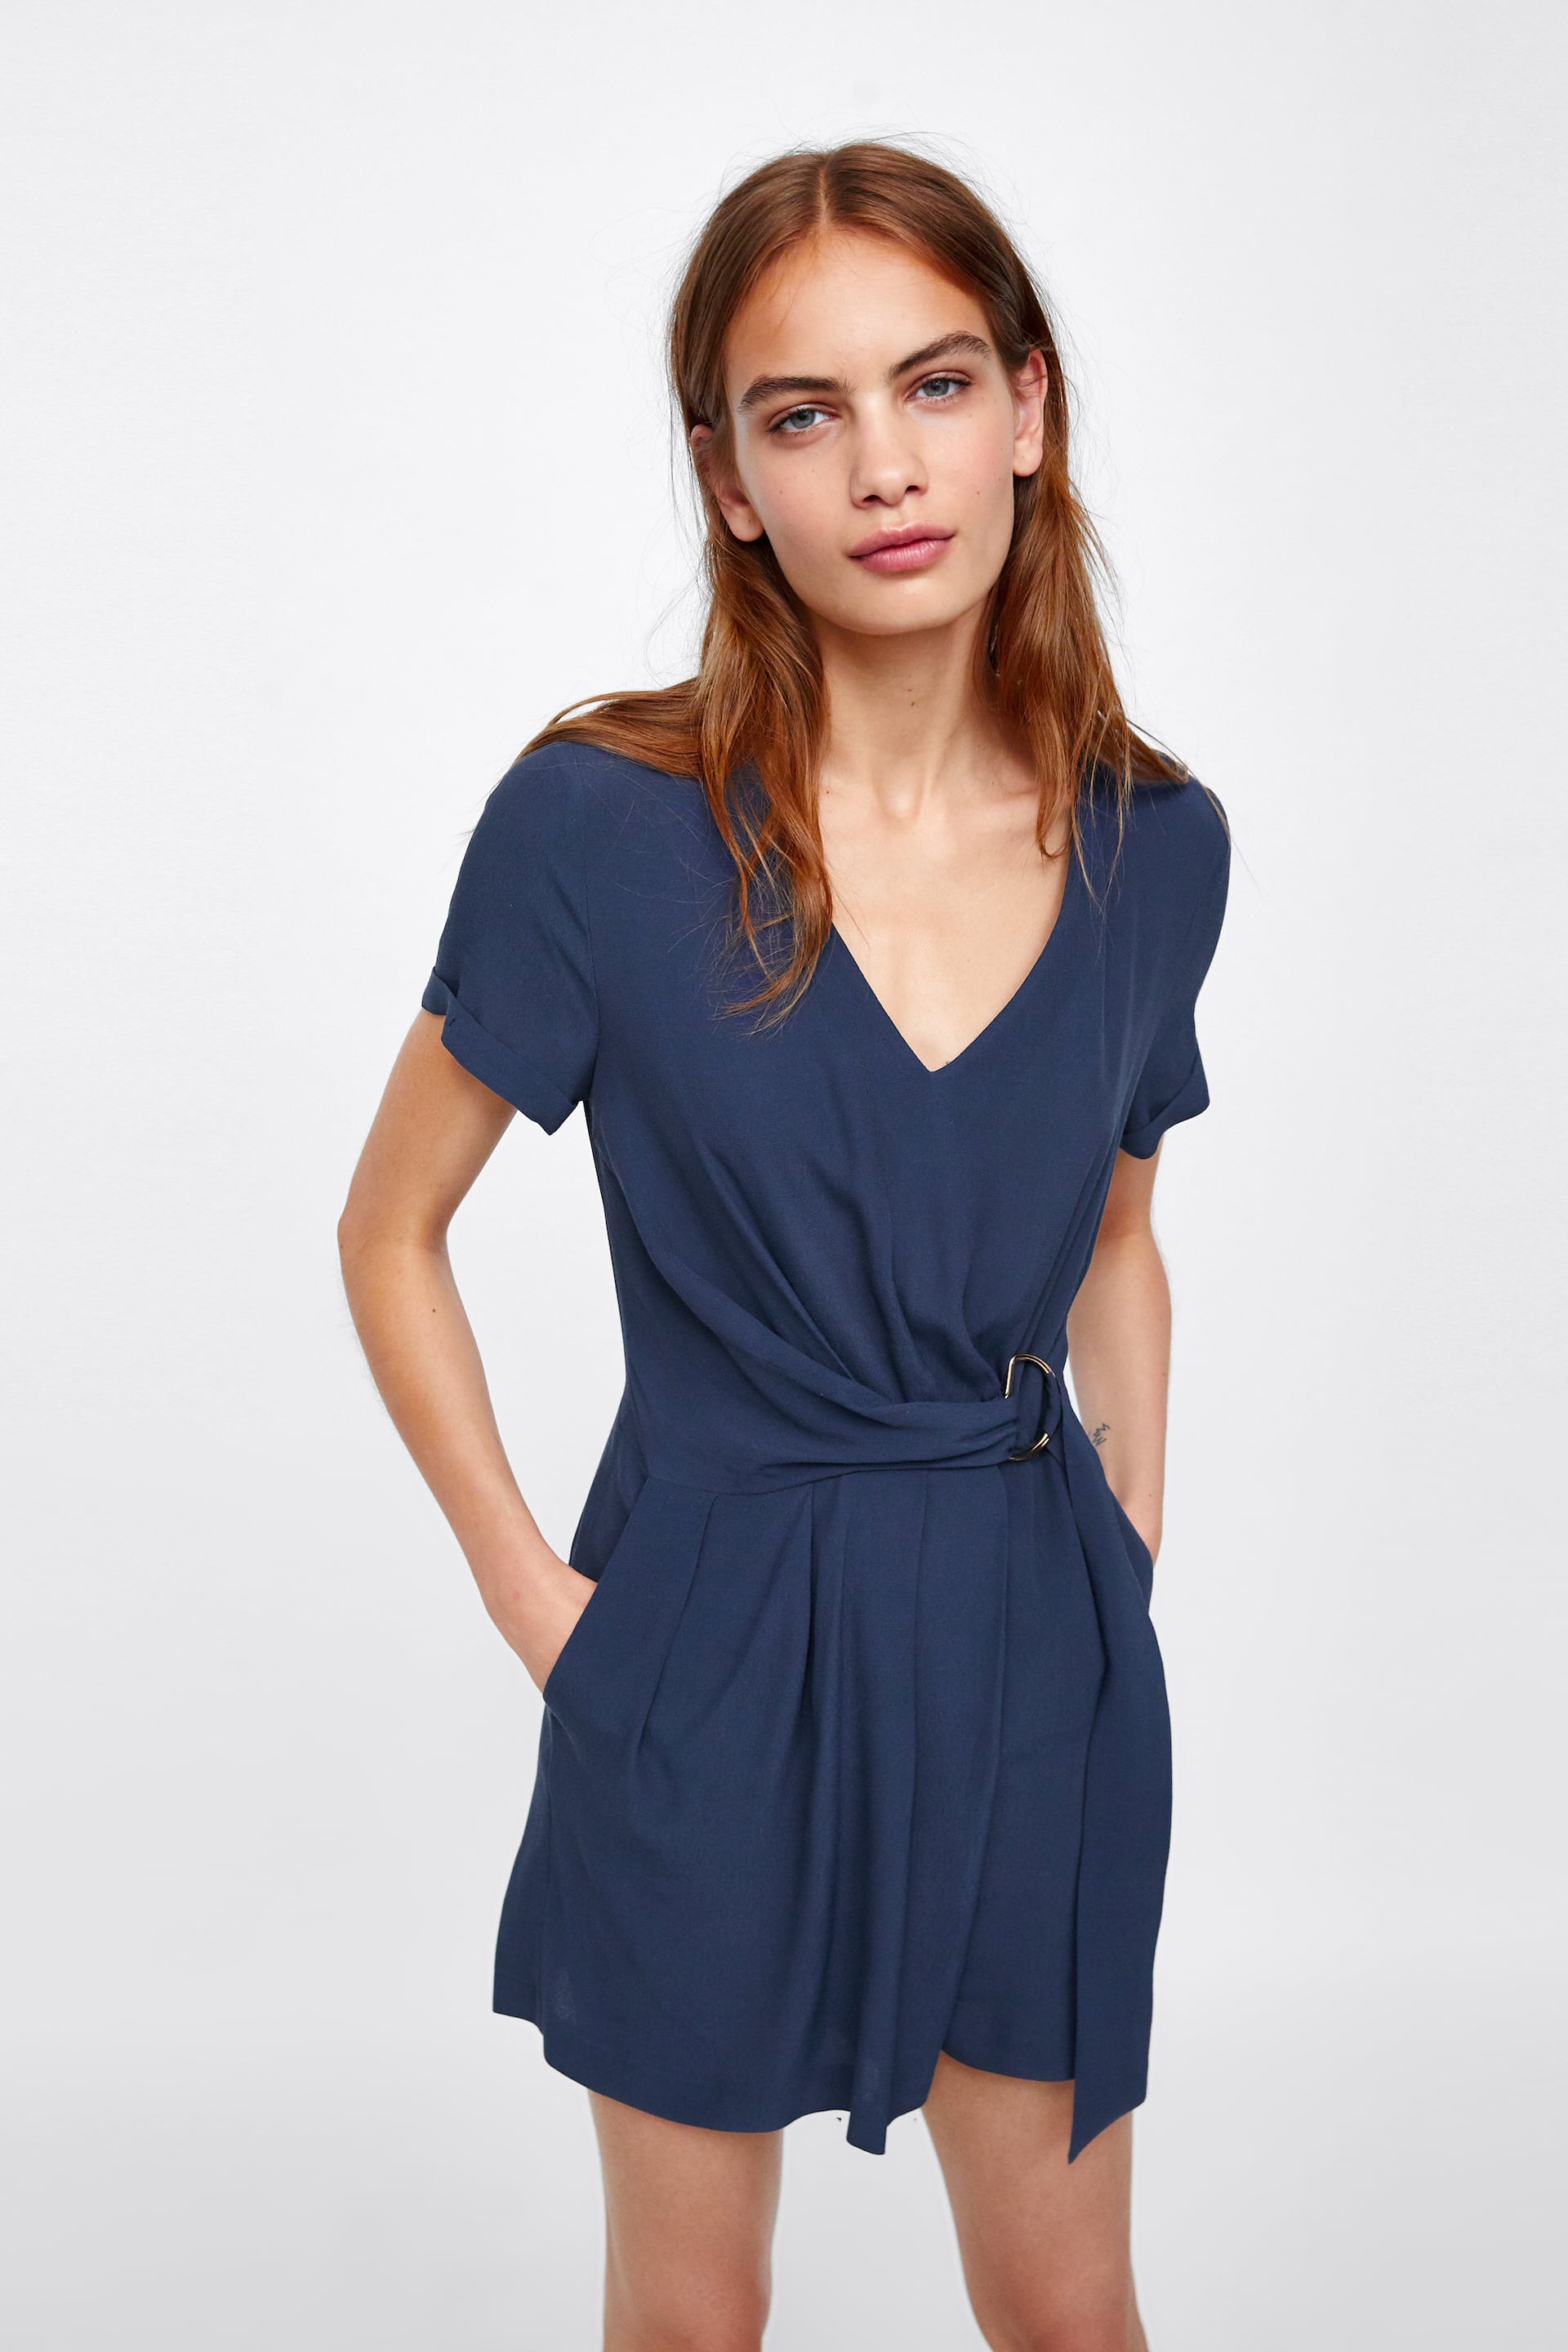 Zara SHORT JUMPSUIT WITH D-RING BUCKLE at £29.99 | love the brands